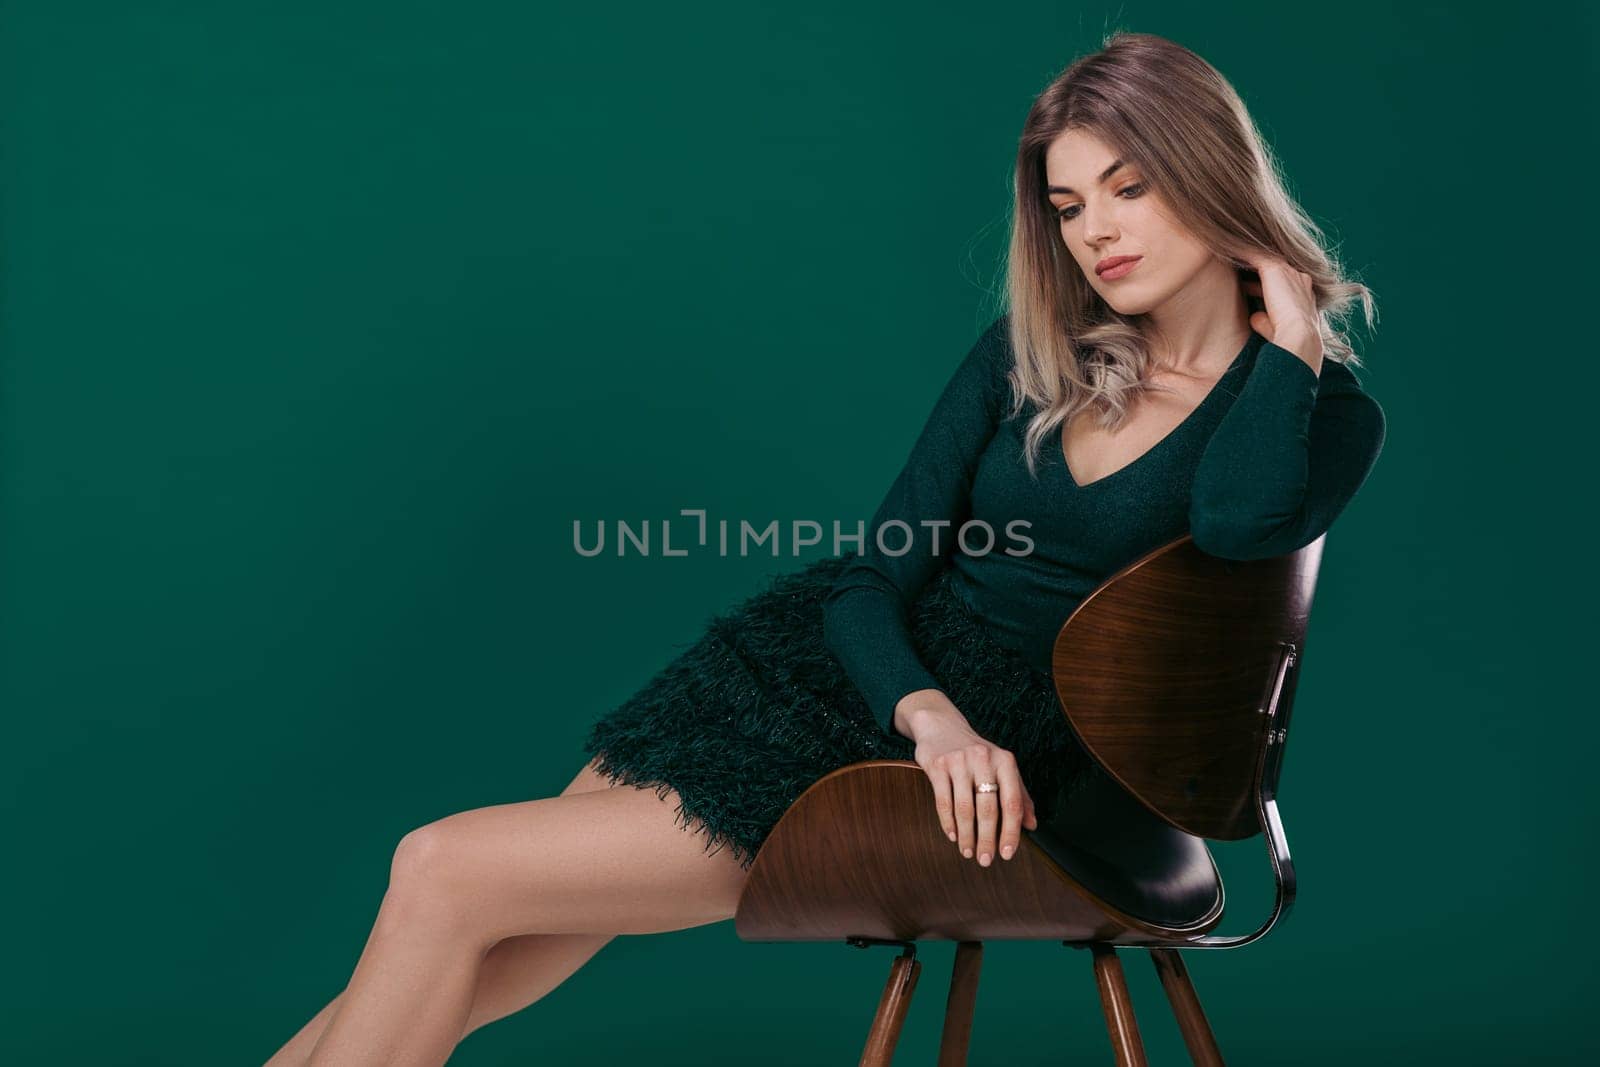 fashion portrait of sensual beautiful blonde woman in green dress sitting on chair against green background. space for text